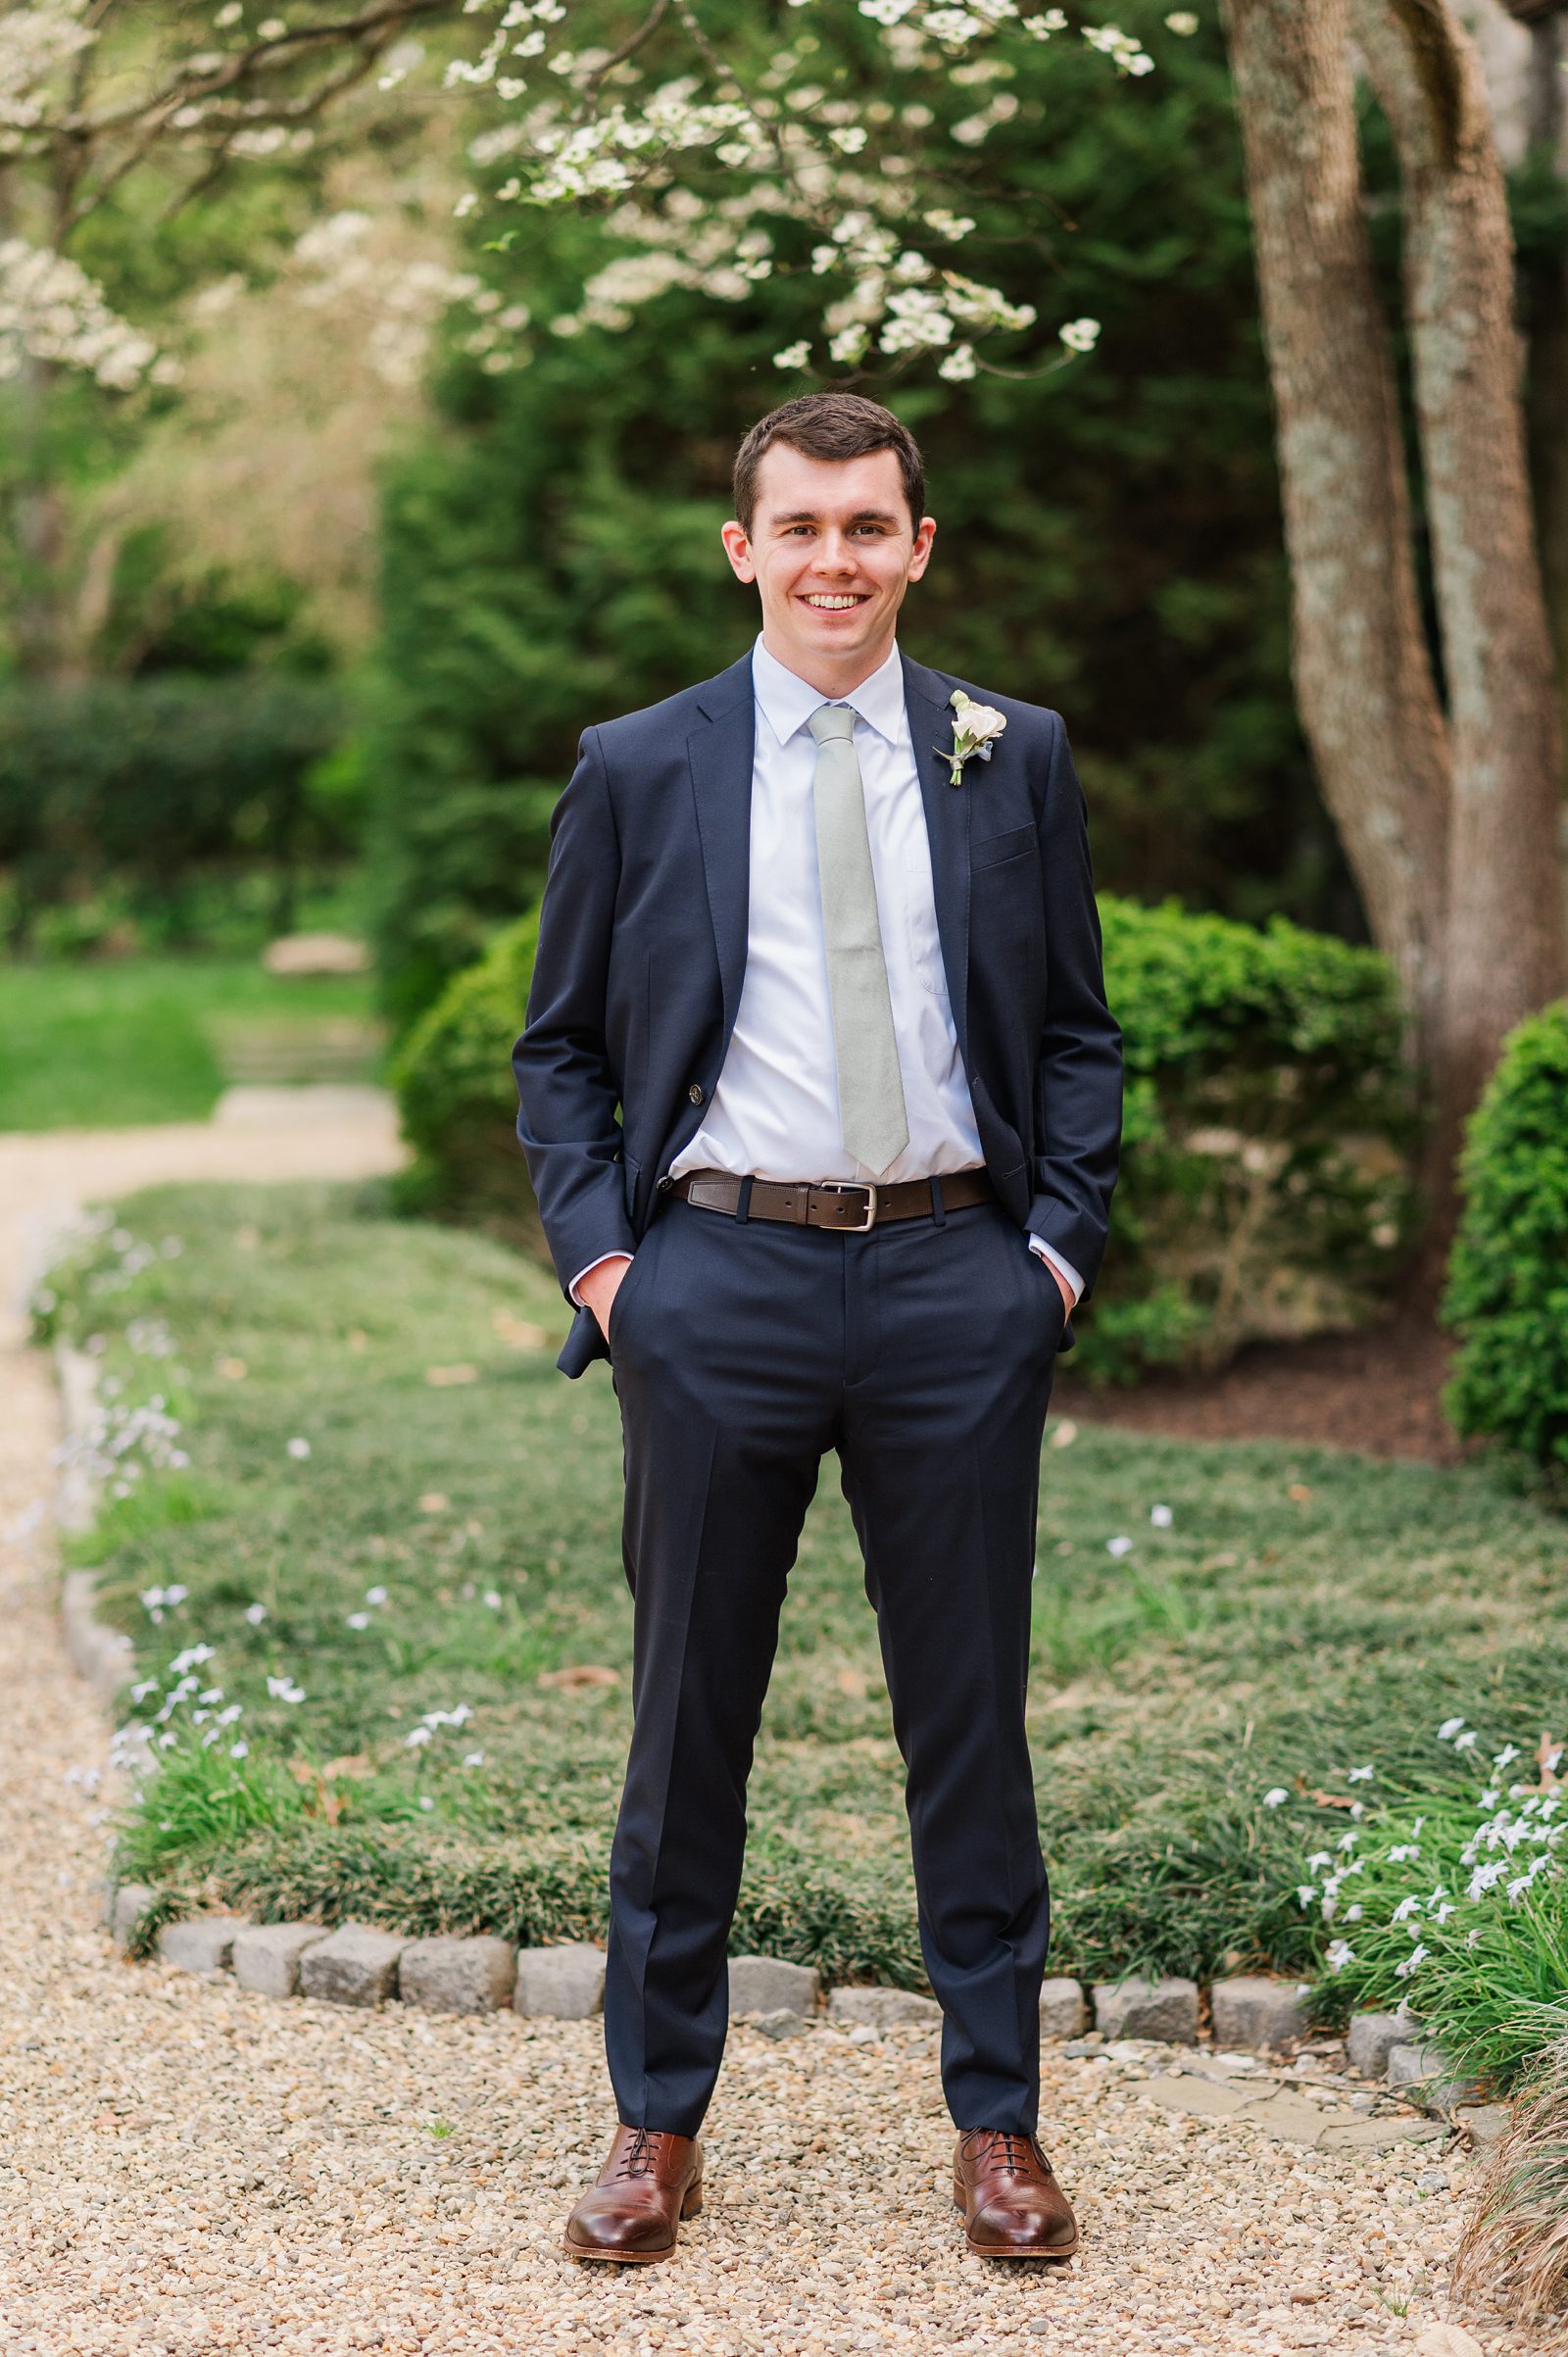 Portrait of the Groom at an Intimate Virginia House Wedding by Richmond Wedding Photographer Kailey Brianne Photography.